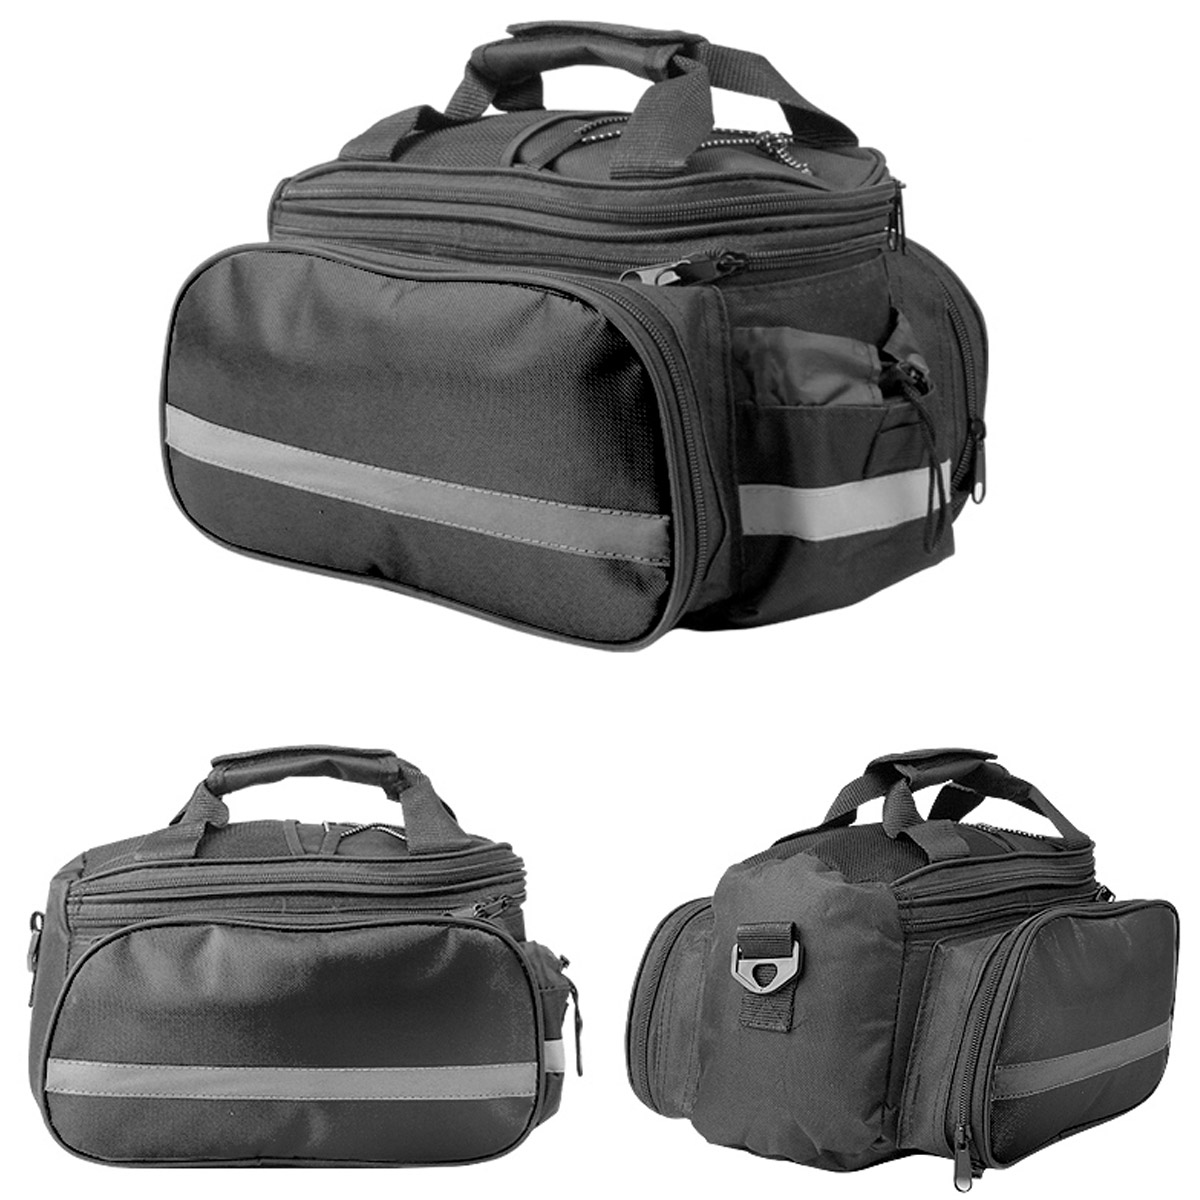 27L-Bicycle-Riding-Package-Large-Capacity-Waterproof-Reflective-Strips-Outdoor-Riding-Bag-1874551-15